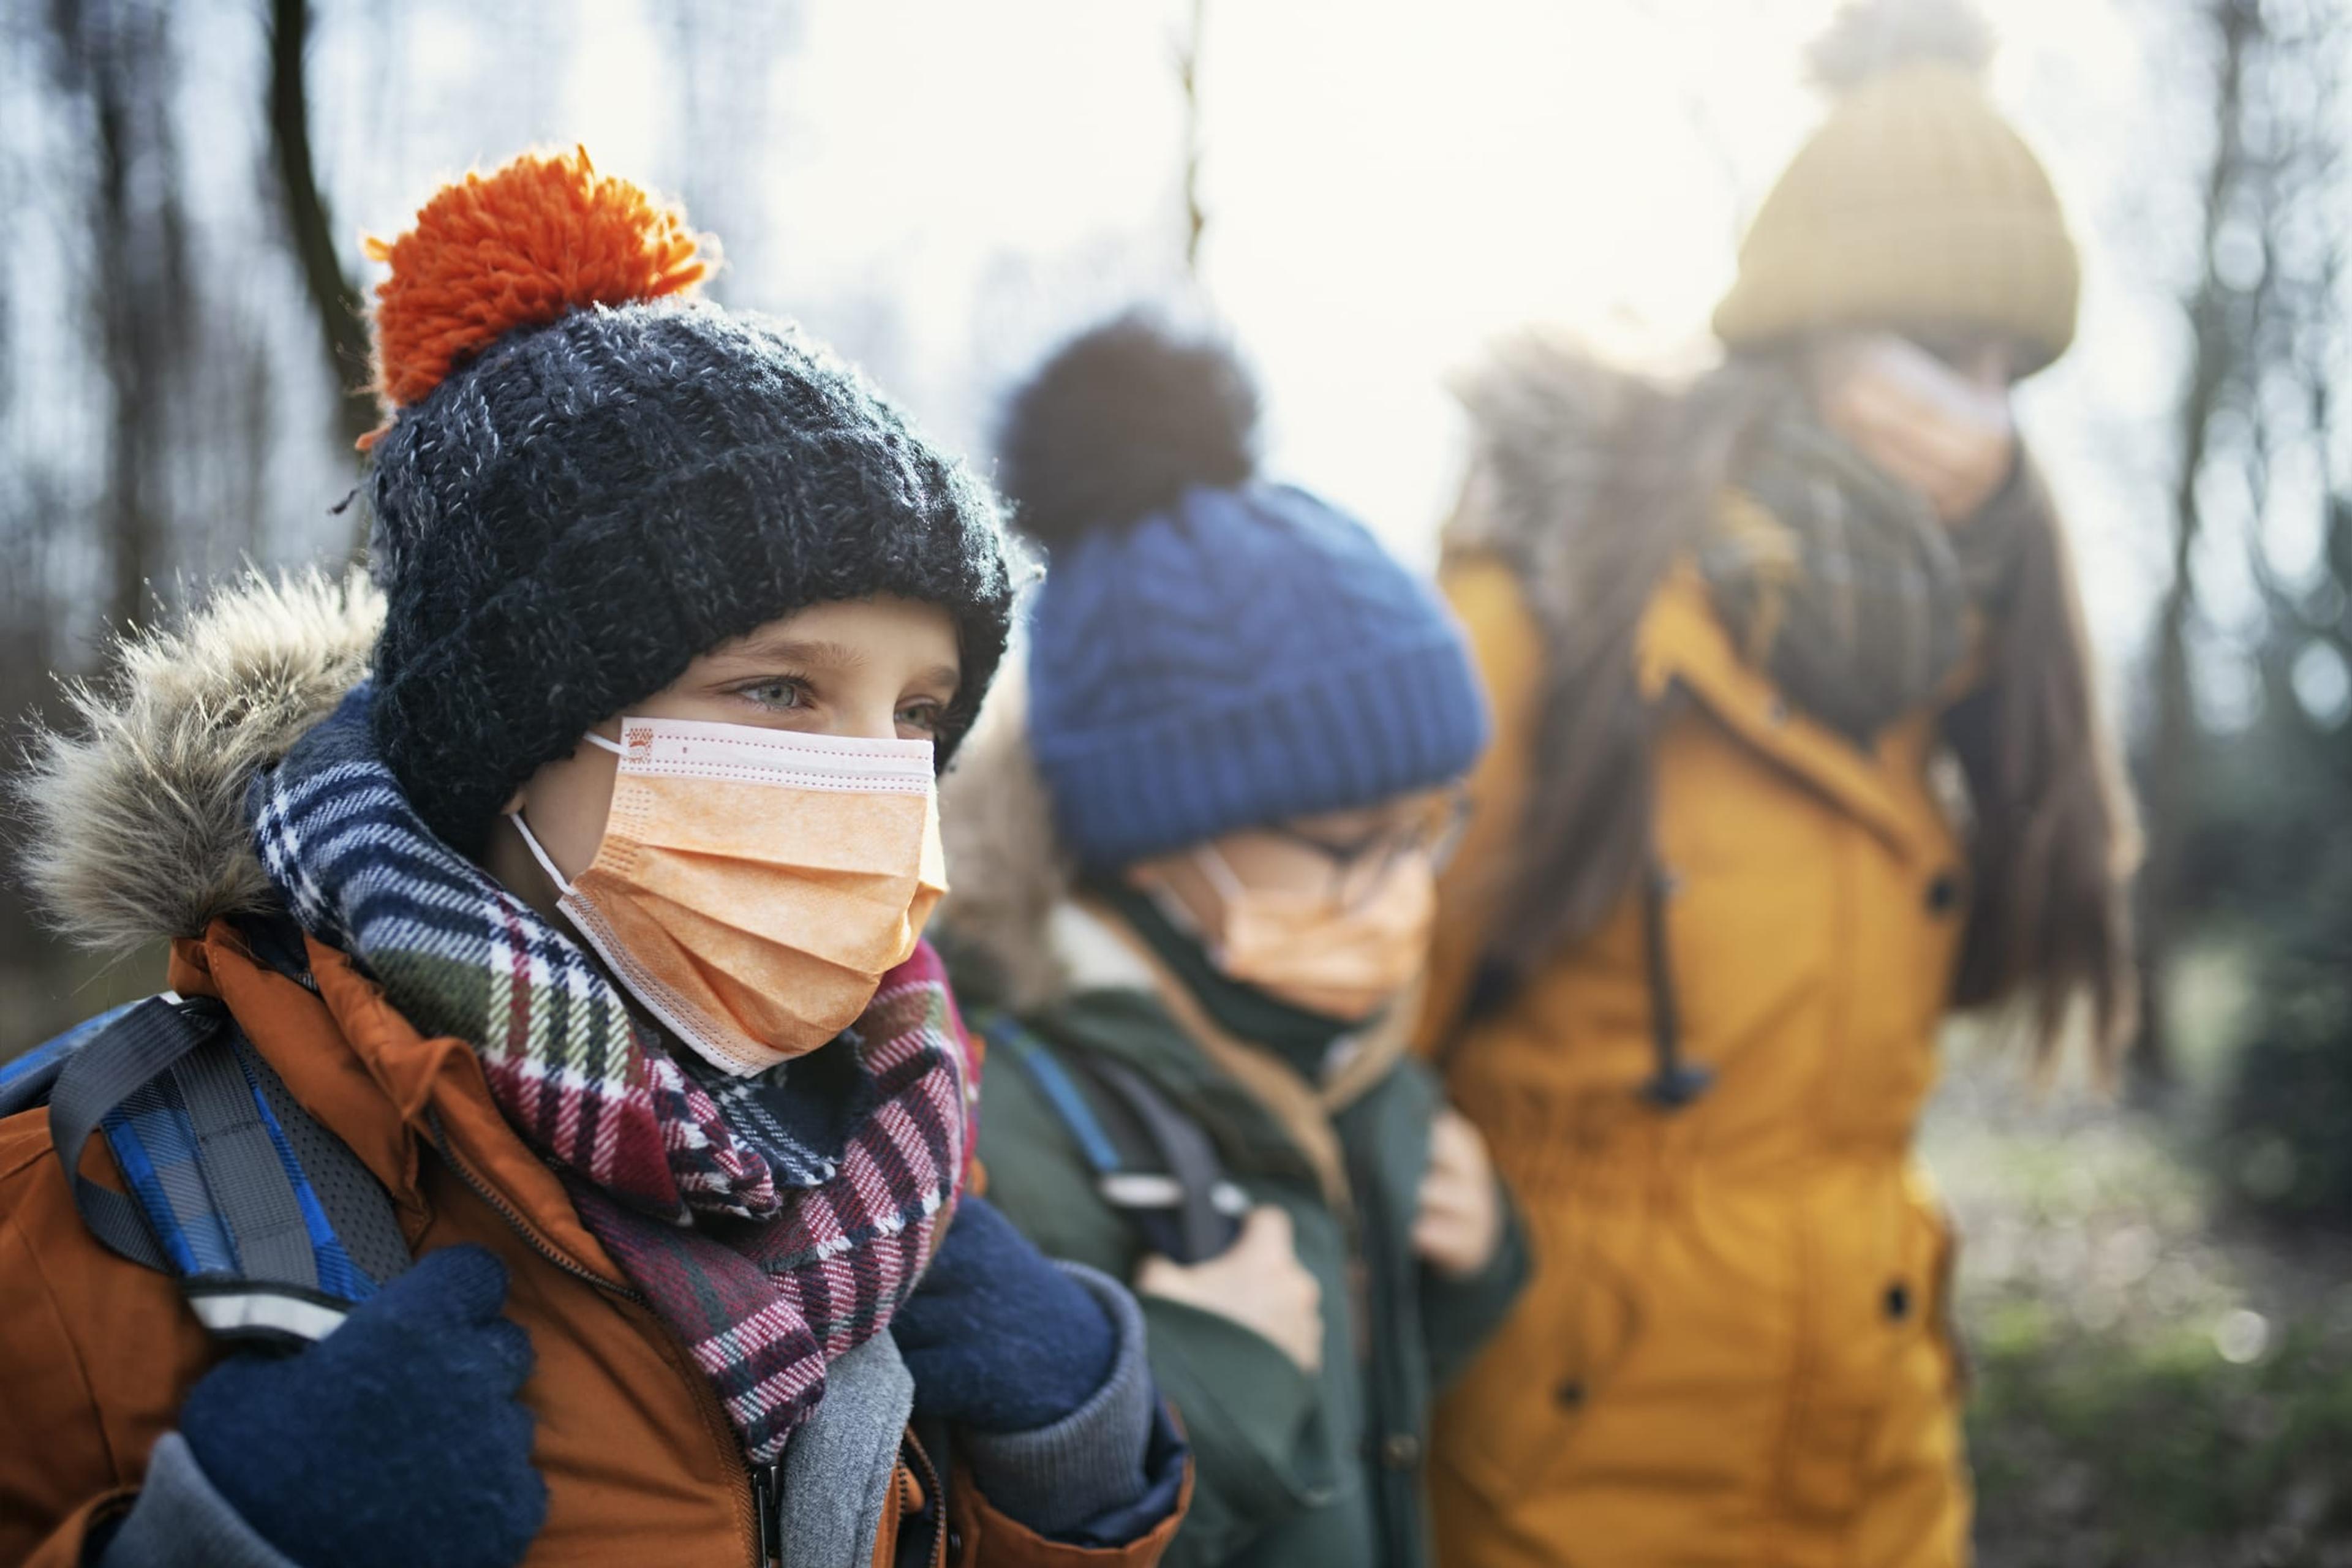 Children in the cold wearing masks